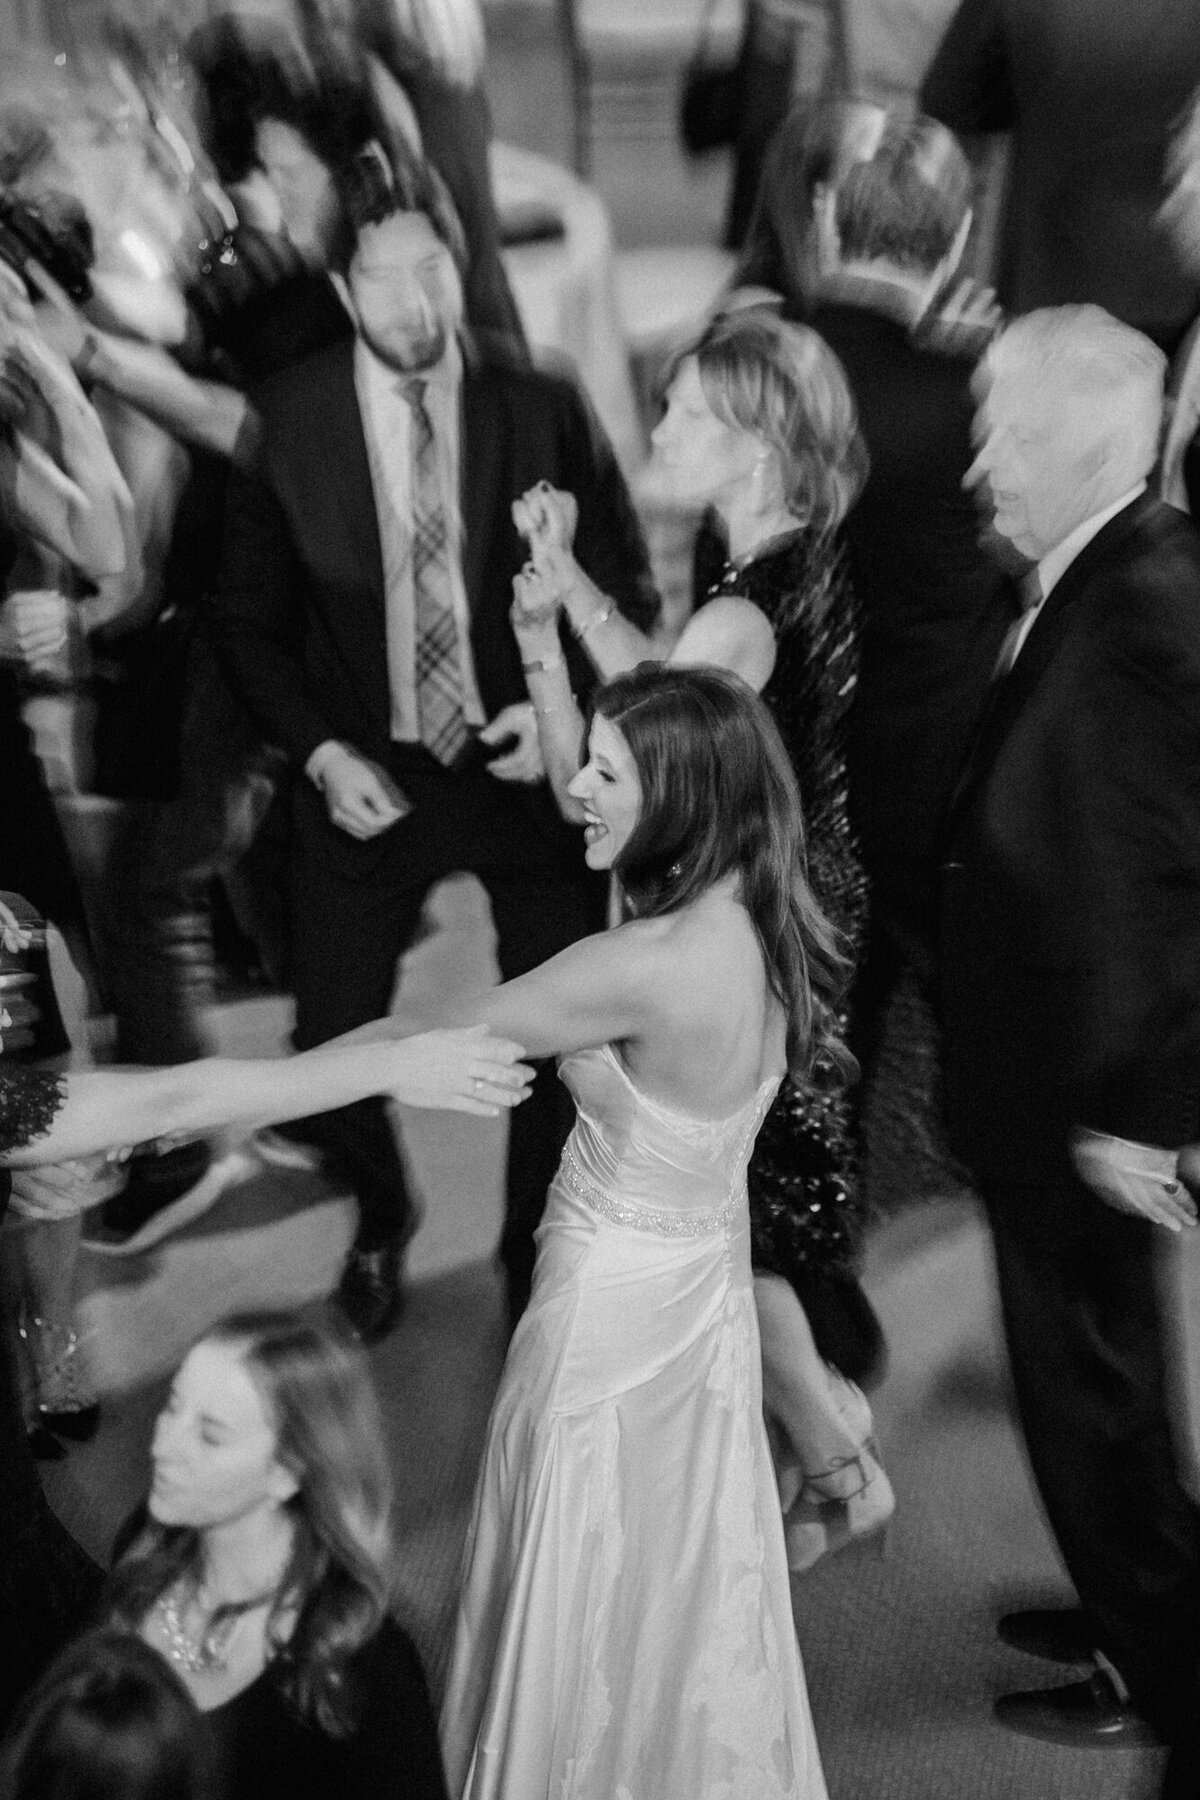 A candid moment on the dance floor of a wedding in Chicago